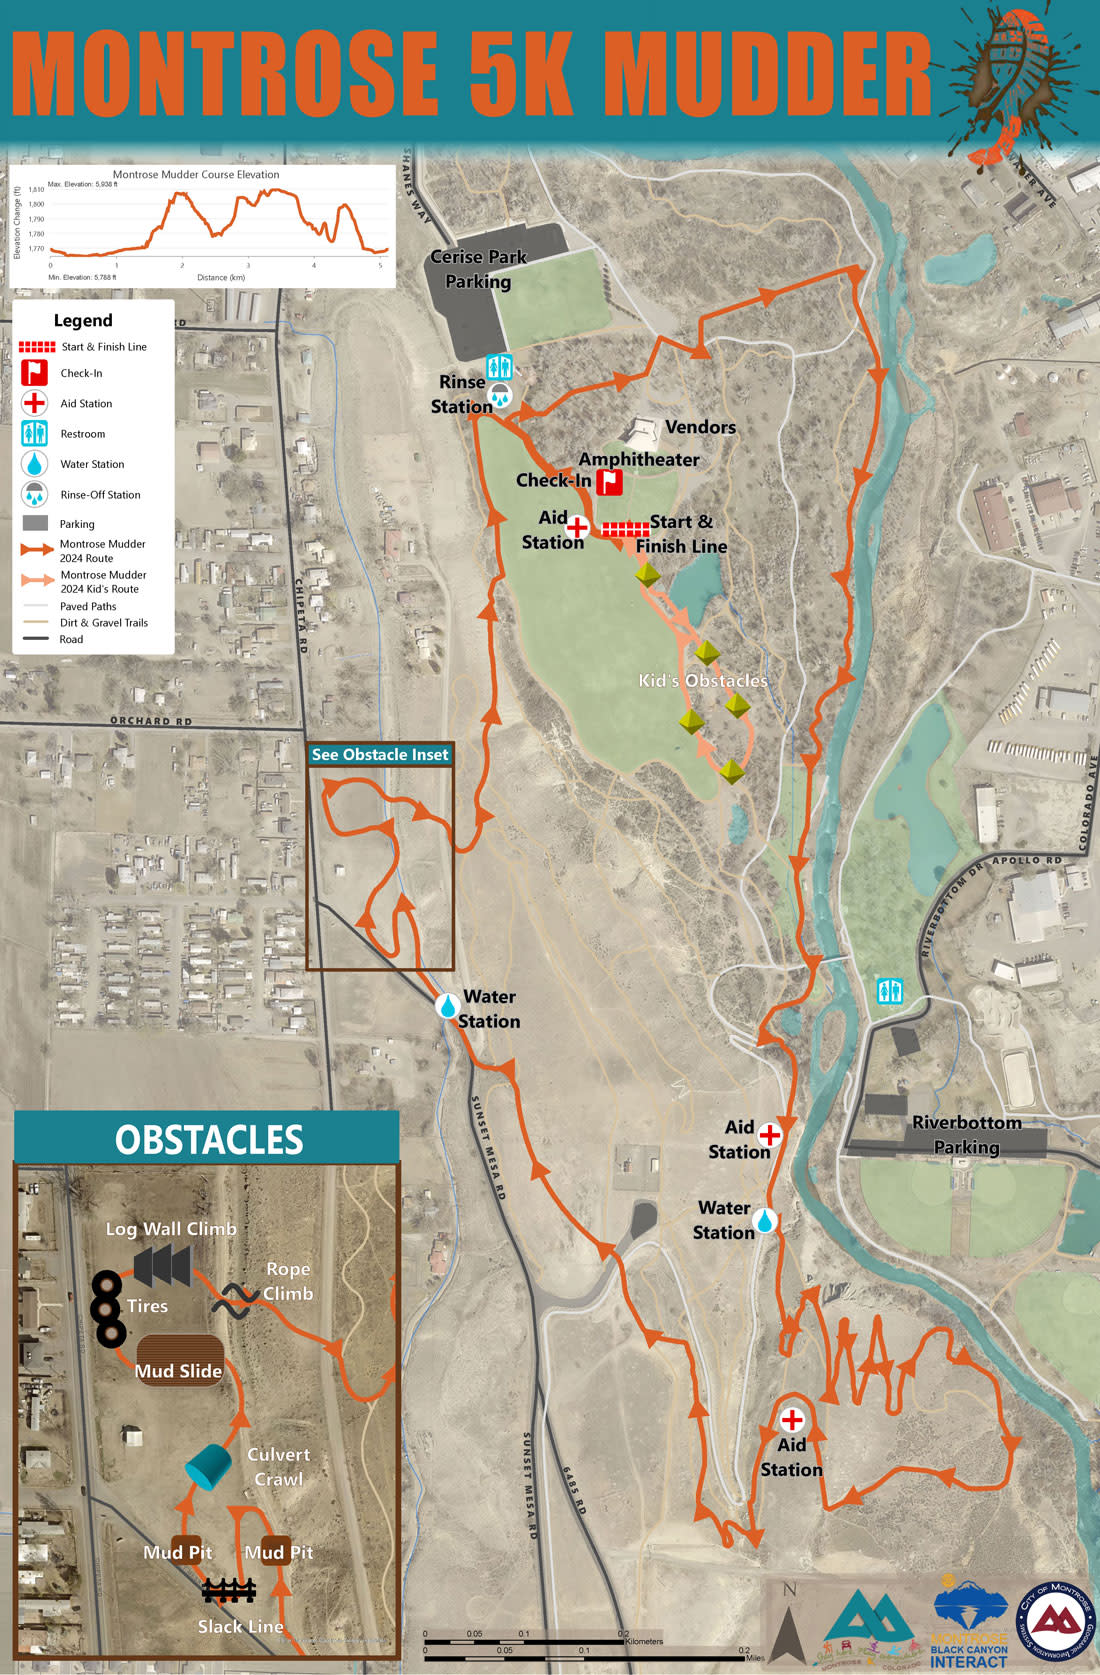 Montrose Mudder 5K Mudder course map showing route through Baldridge Park and location of obstacles